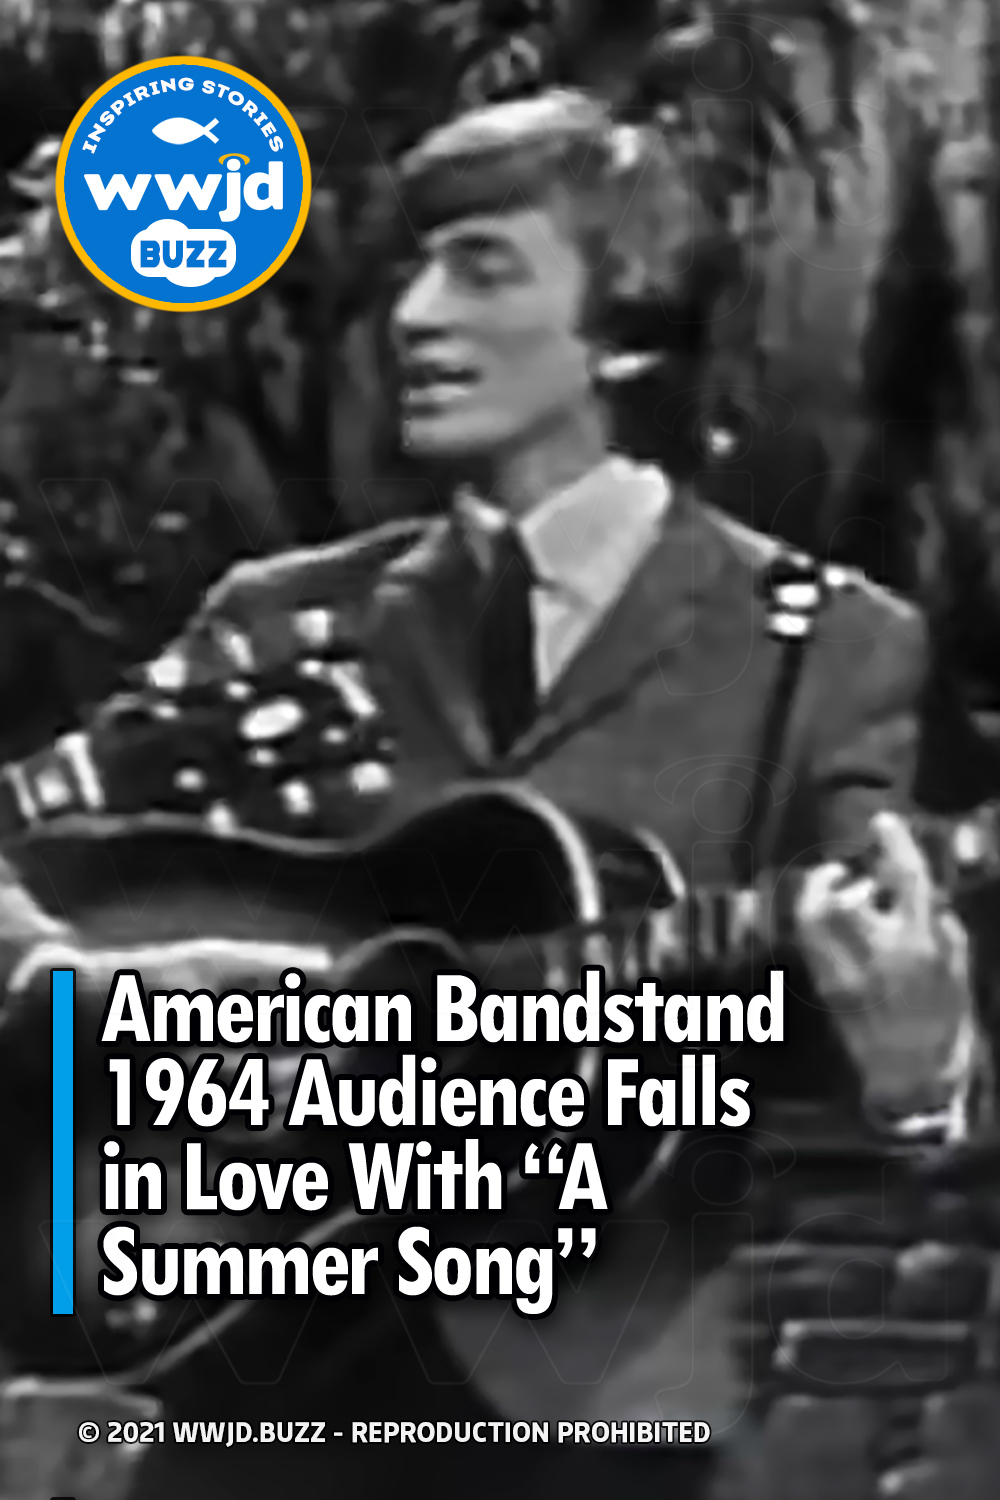 American Bandstand 1964 Audience Falls in Love With “A Summer Song”